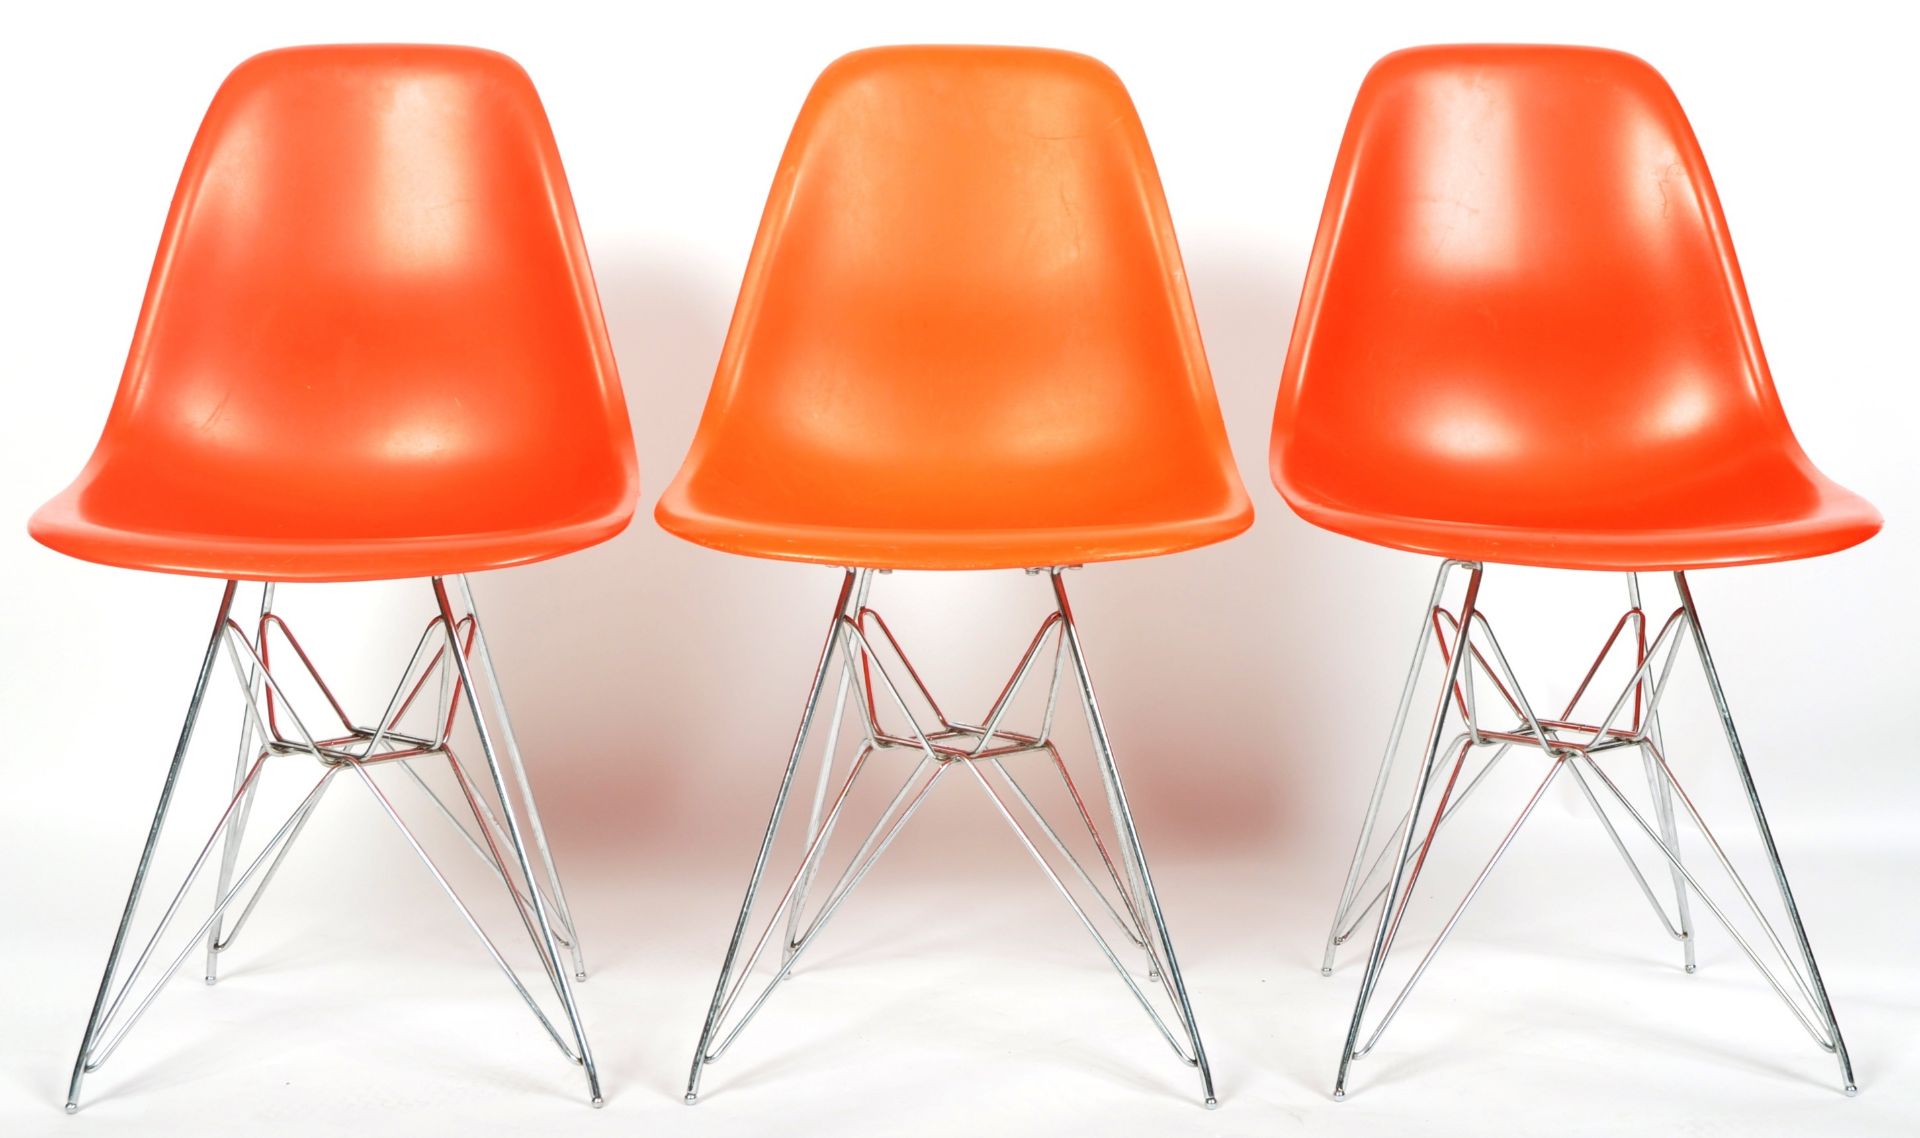 CHARLES & RAY EAMES FOR VITRA - SET OF SIX DSR EAMES PLASTIC CHAIRS - Image 3 of 10